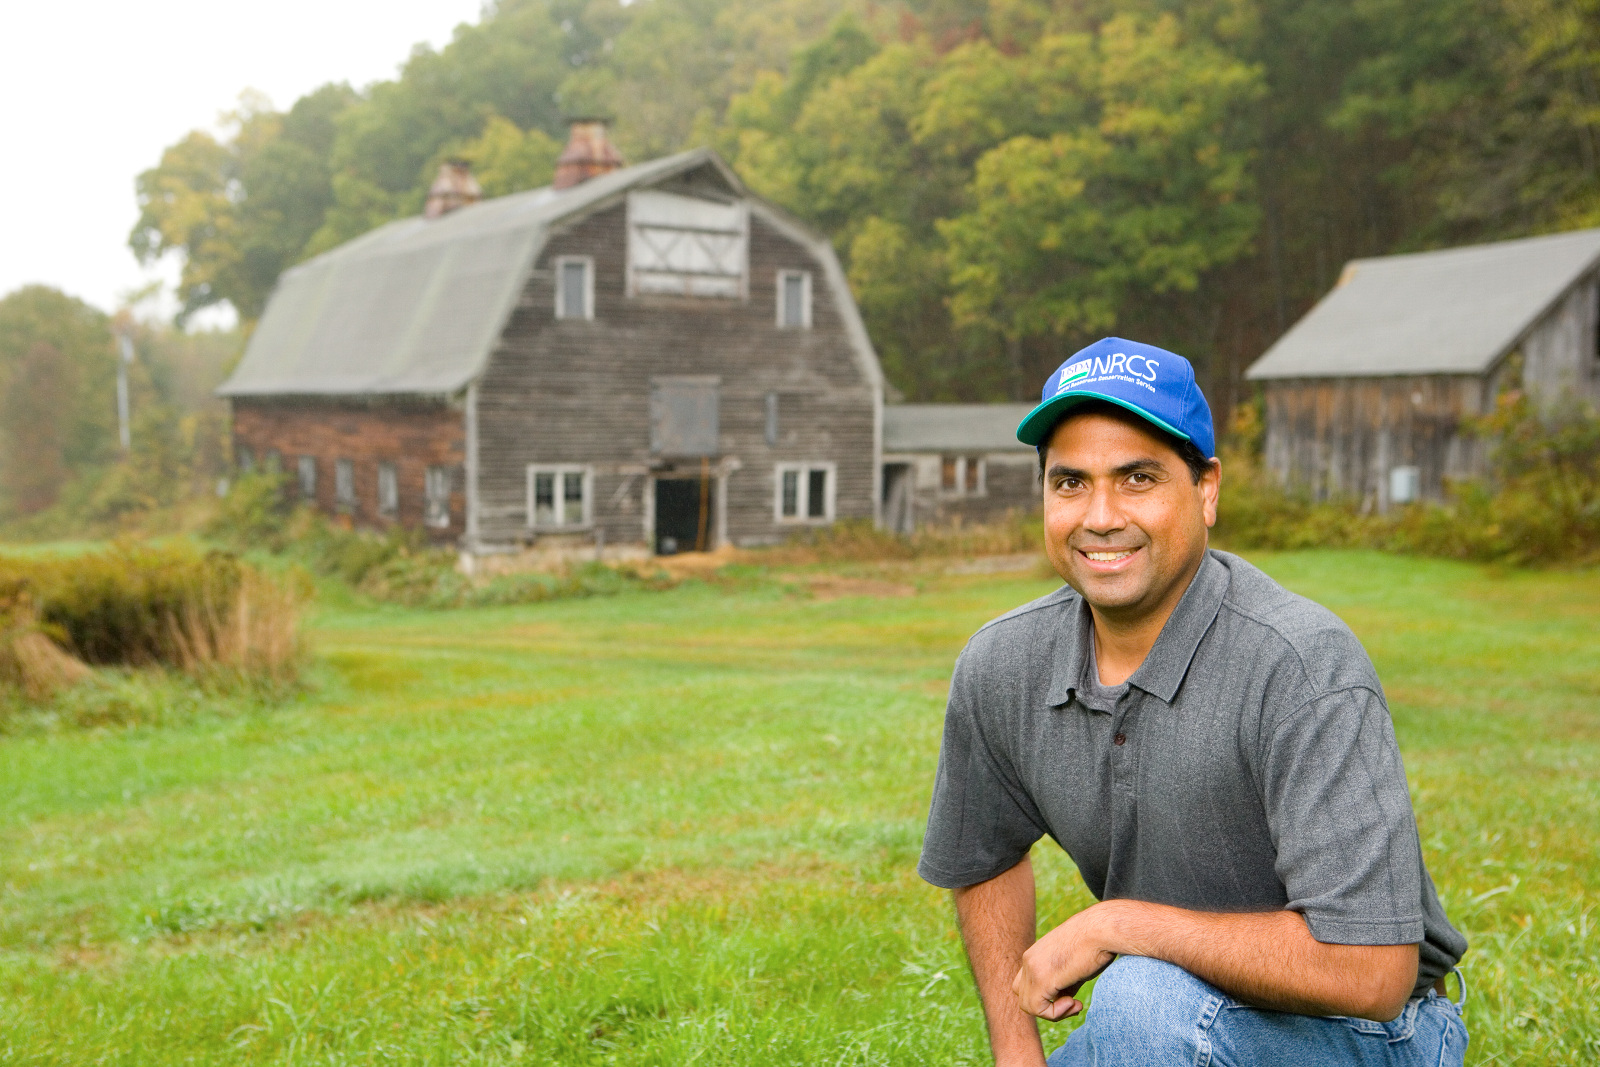 A man posing in front of a weathered barn